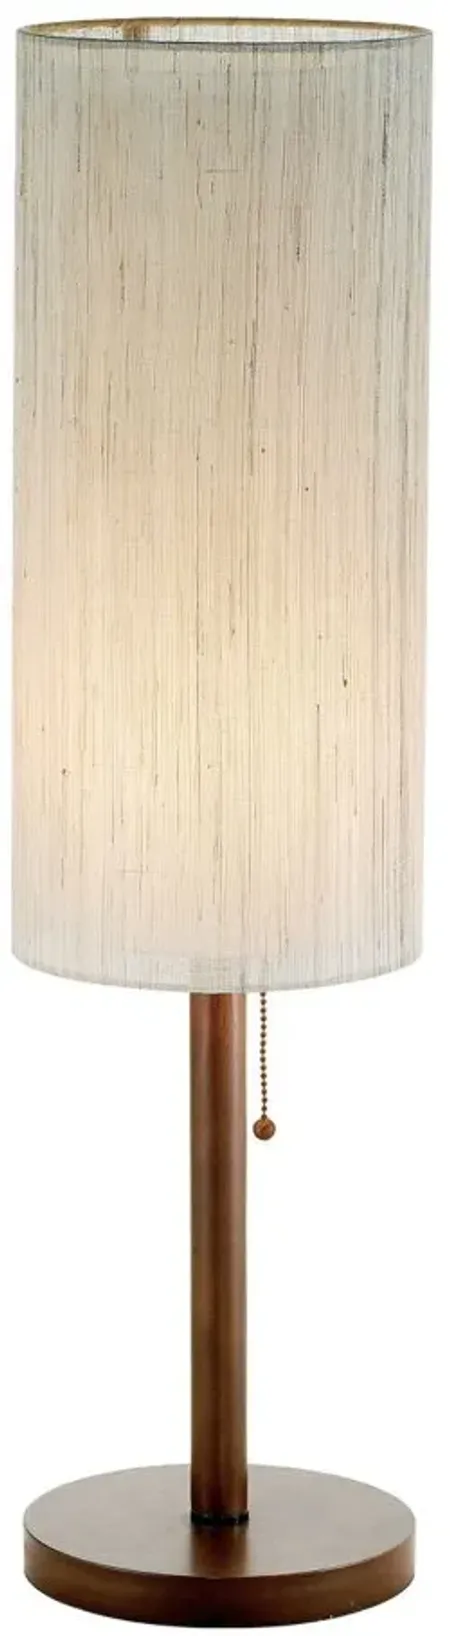 Hamptons Table Lamp in Walnut by Adesso Inc